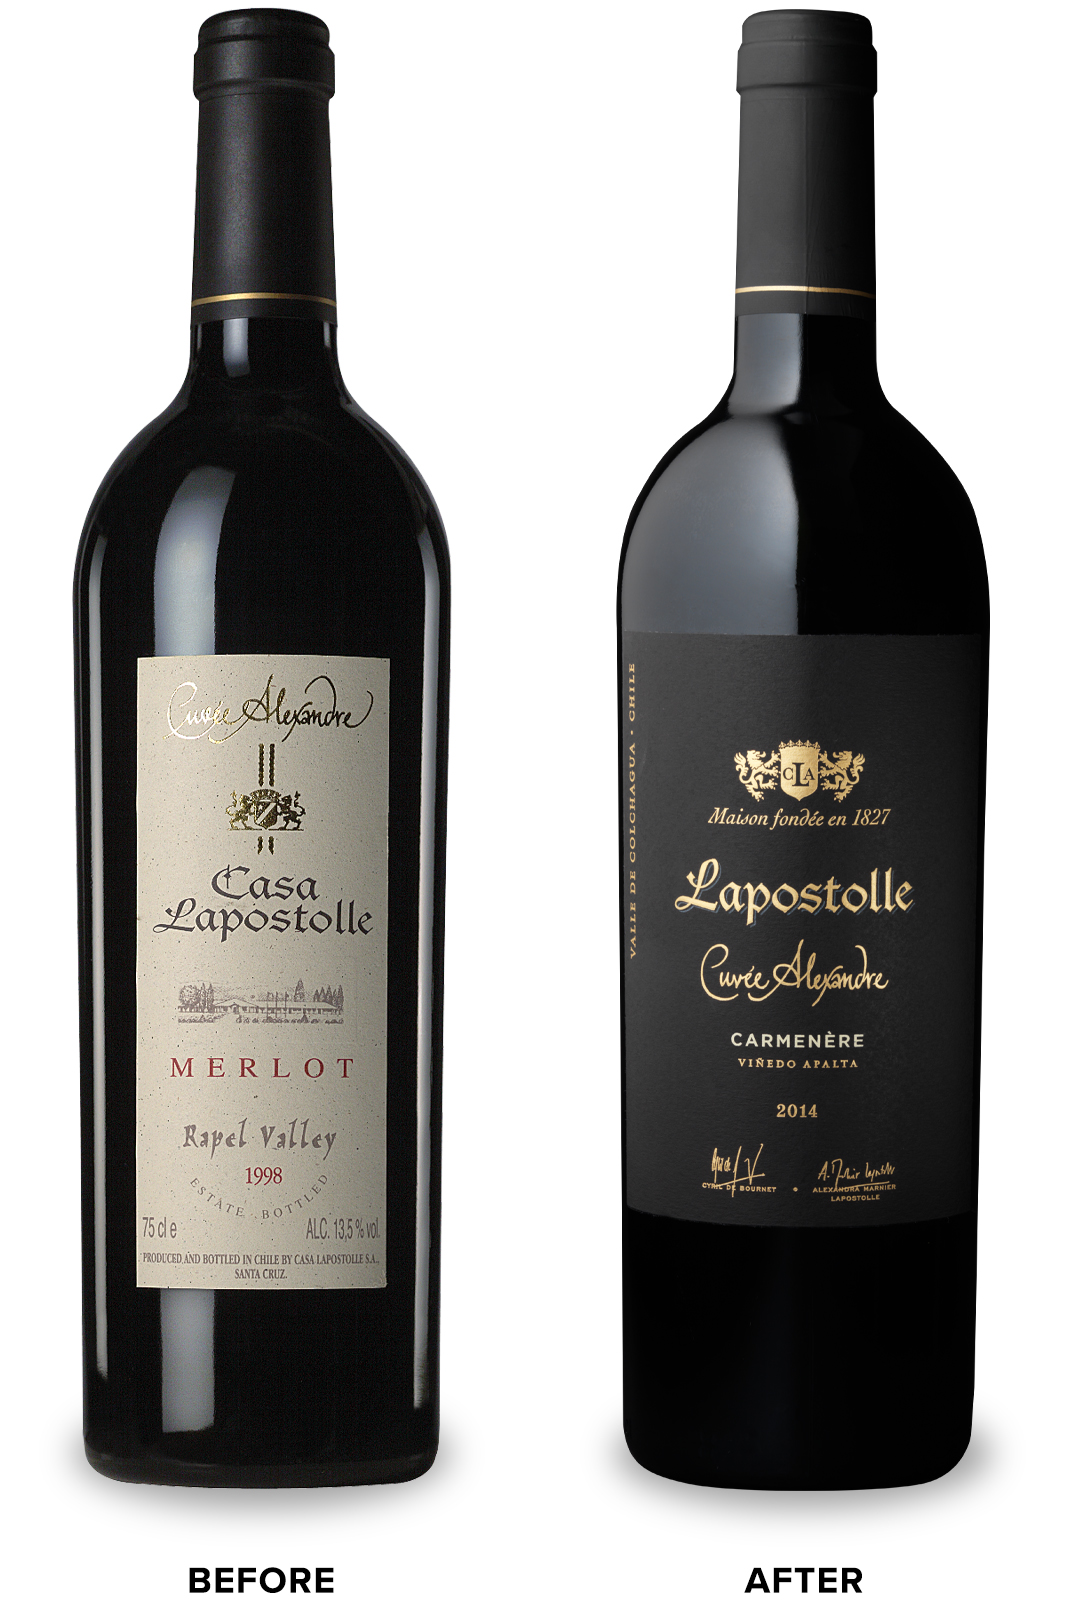 Lapostolle Cuvée Alexandre Wine Packaging Before Redesign on Left & After on Right